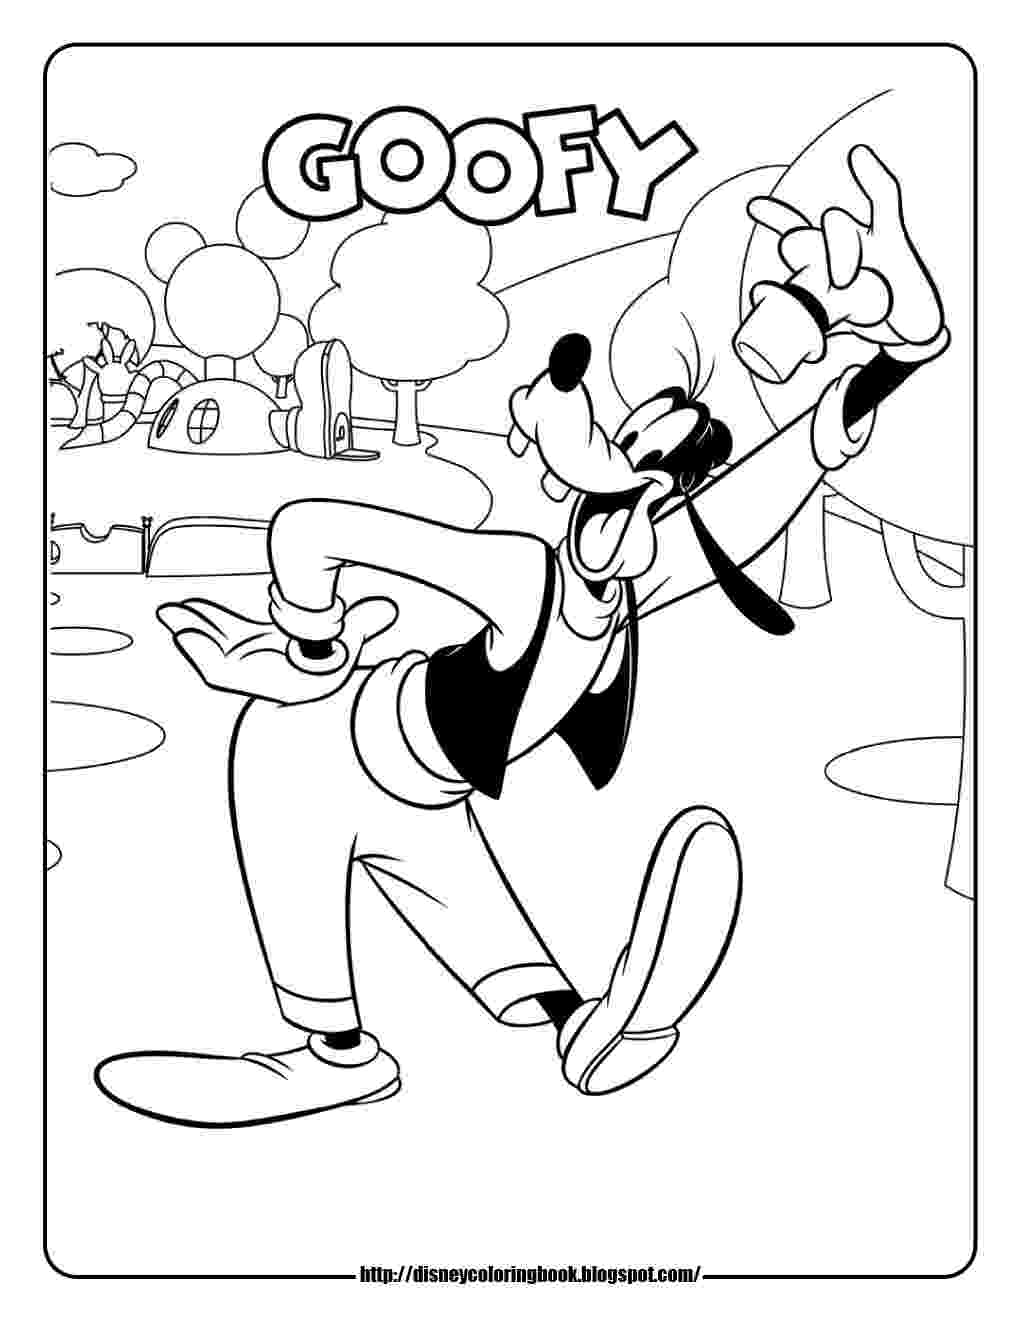 mickey mouse characters coloring pages may 2010 gtgt disney coloring pages coloring mickey pages mouse characters 